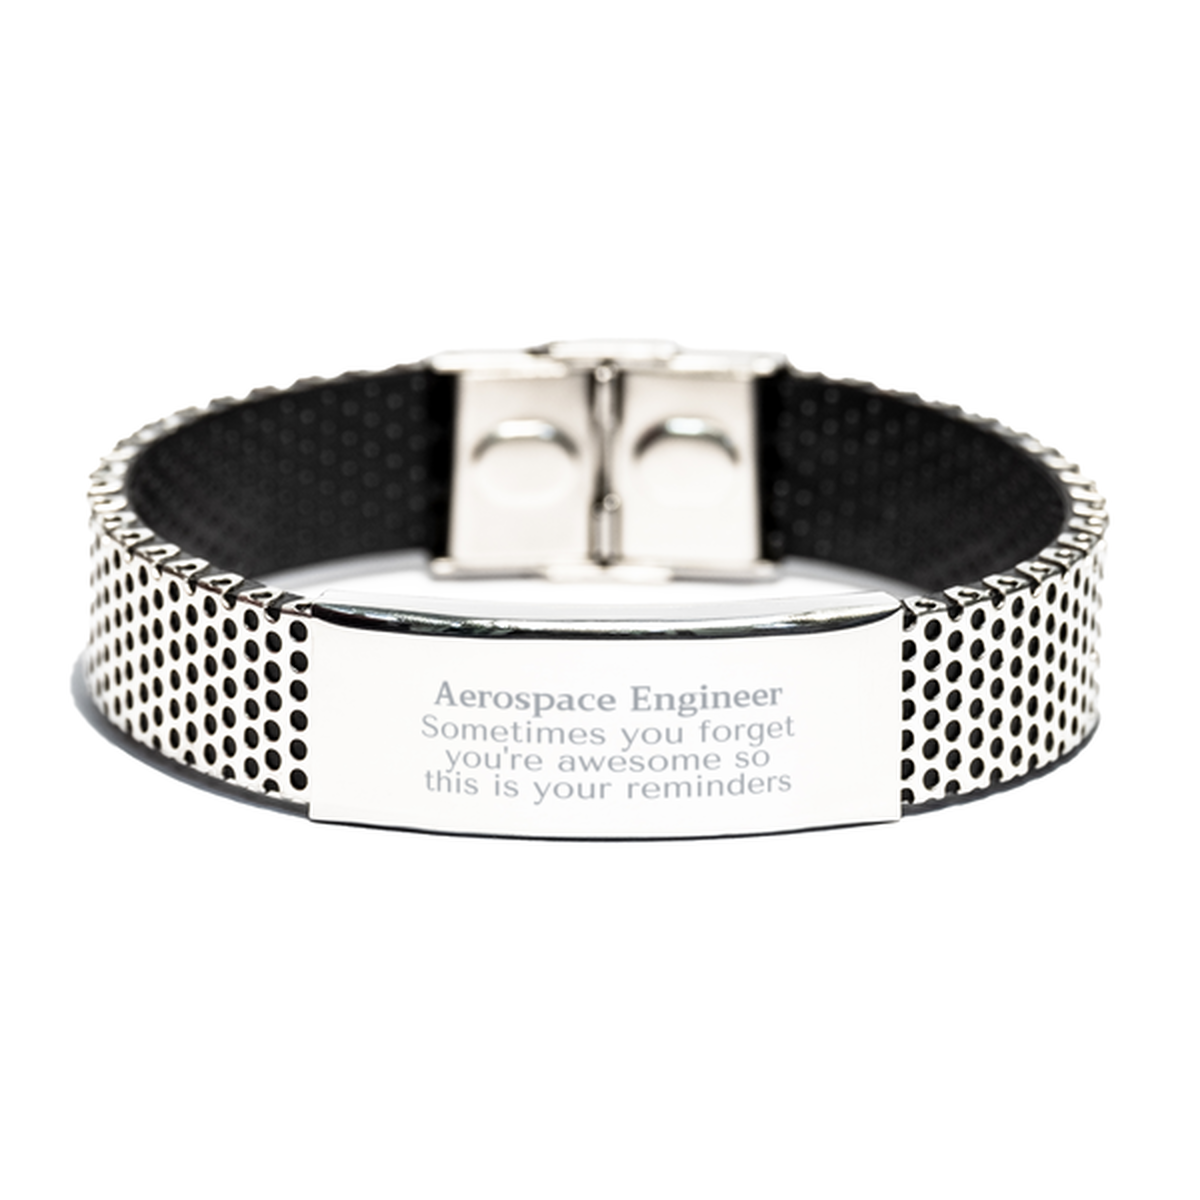 Sentimental Aerospace Engineer Stainless Steel Bracelet, Aerospace Engineer Sometimes you forget you're awesome so this is your reminders, Graduation Christmas Birthday Gifts for Aerospace Engineer, Men, Women, Coworkers